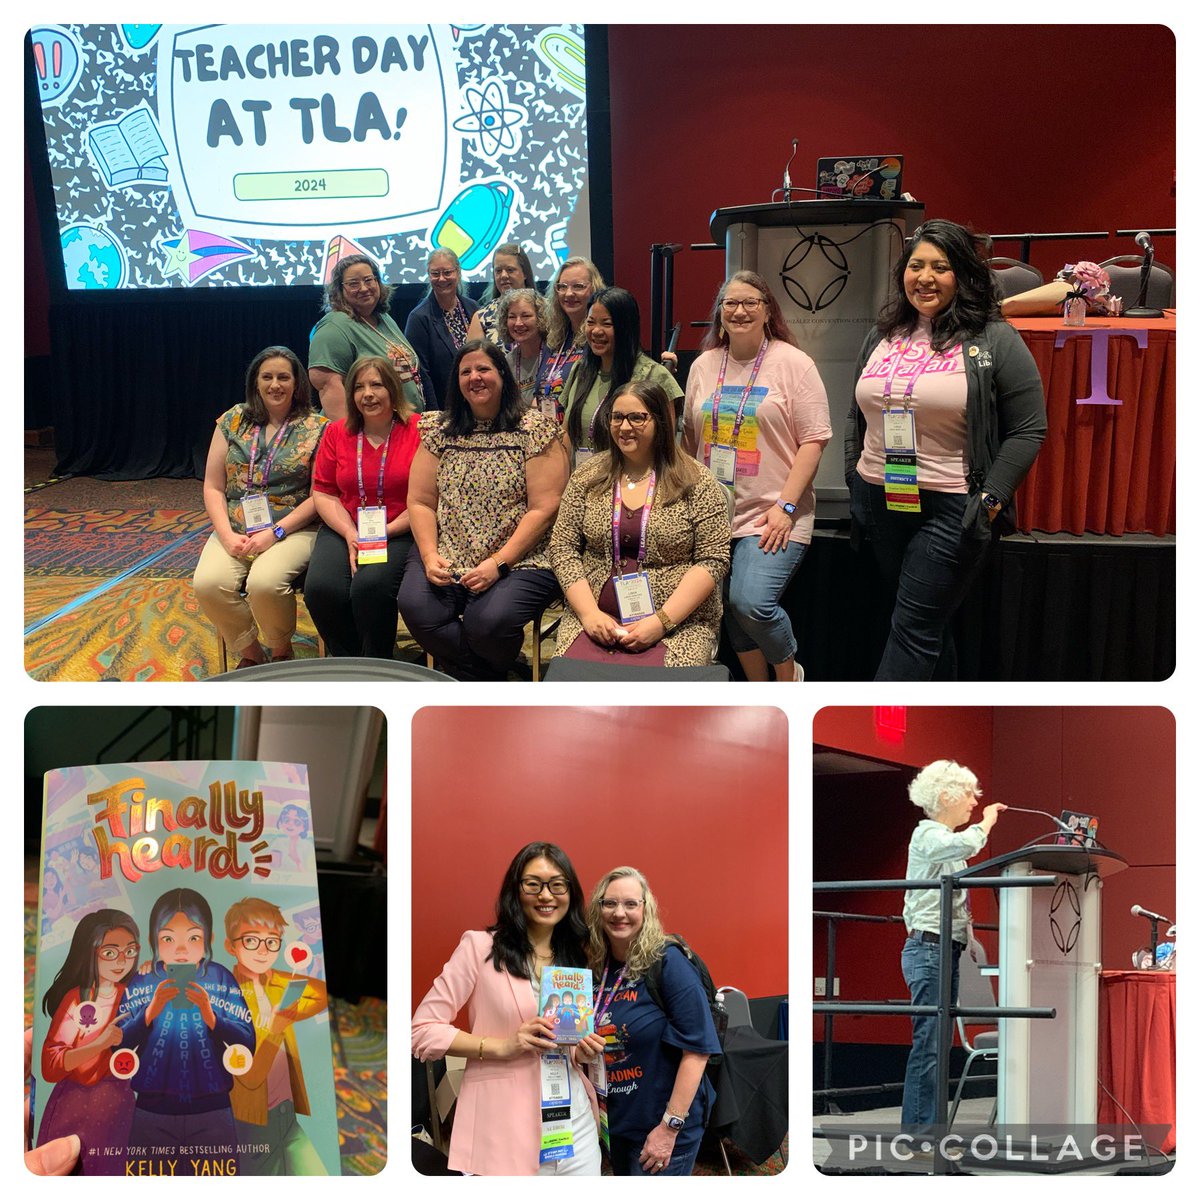 @TeacherDayTLA1 what an inspiring keynote by both @kellyyanghk and @KateDiCamillo. What a great honor to work on this committee that promotes teacher and librarian collaboration! #txla24 @AltonElementary @BrenhamISD #aescubsread